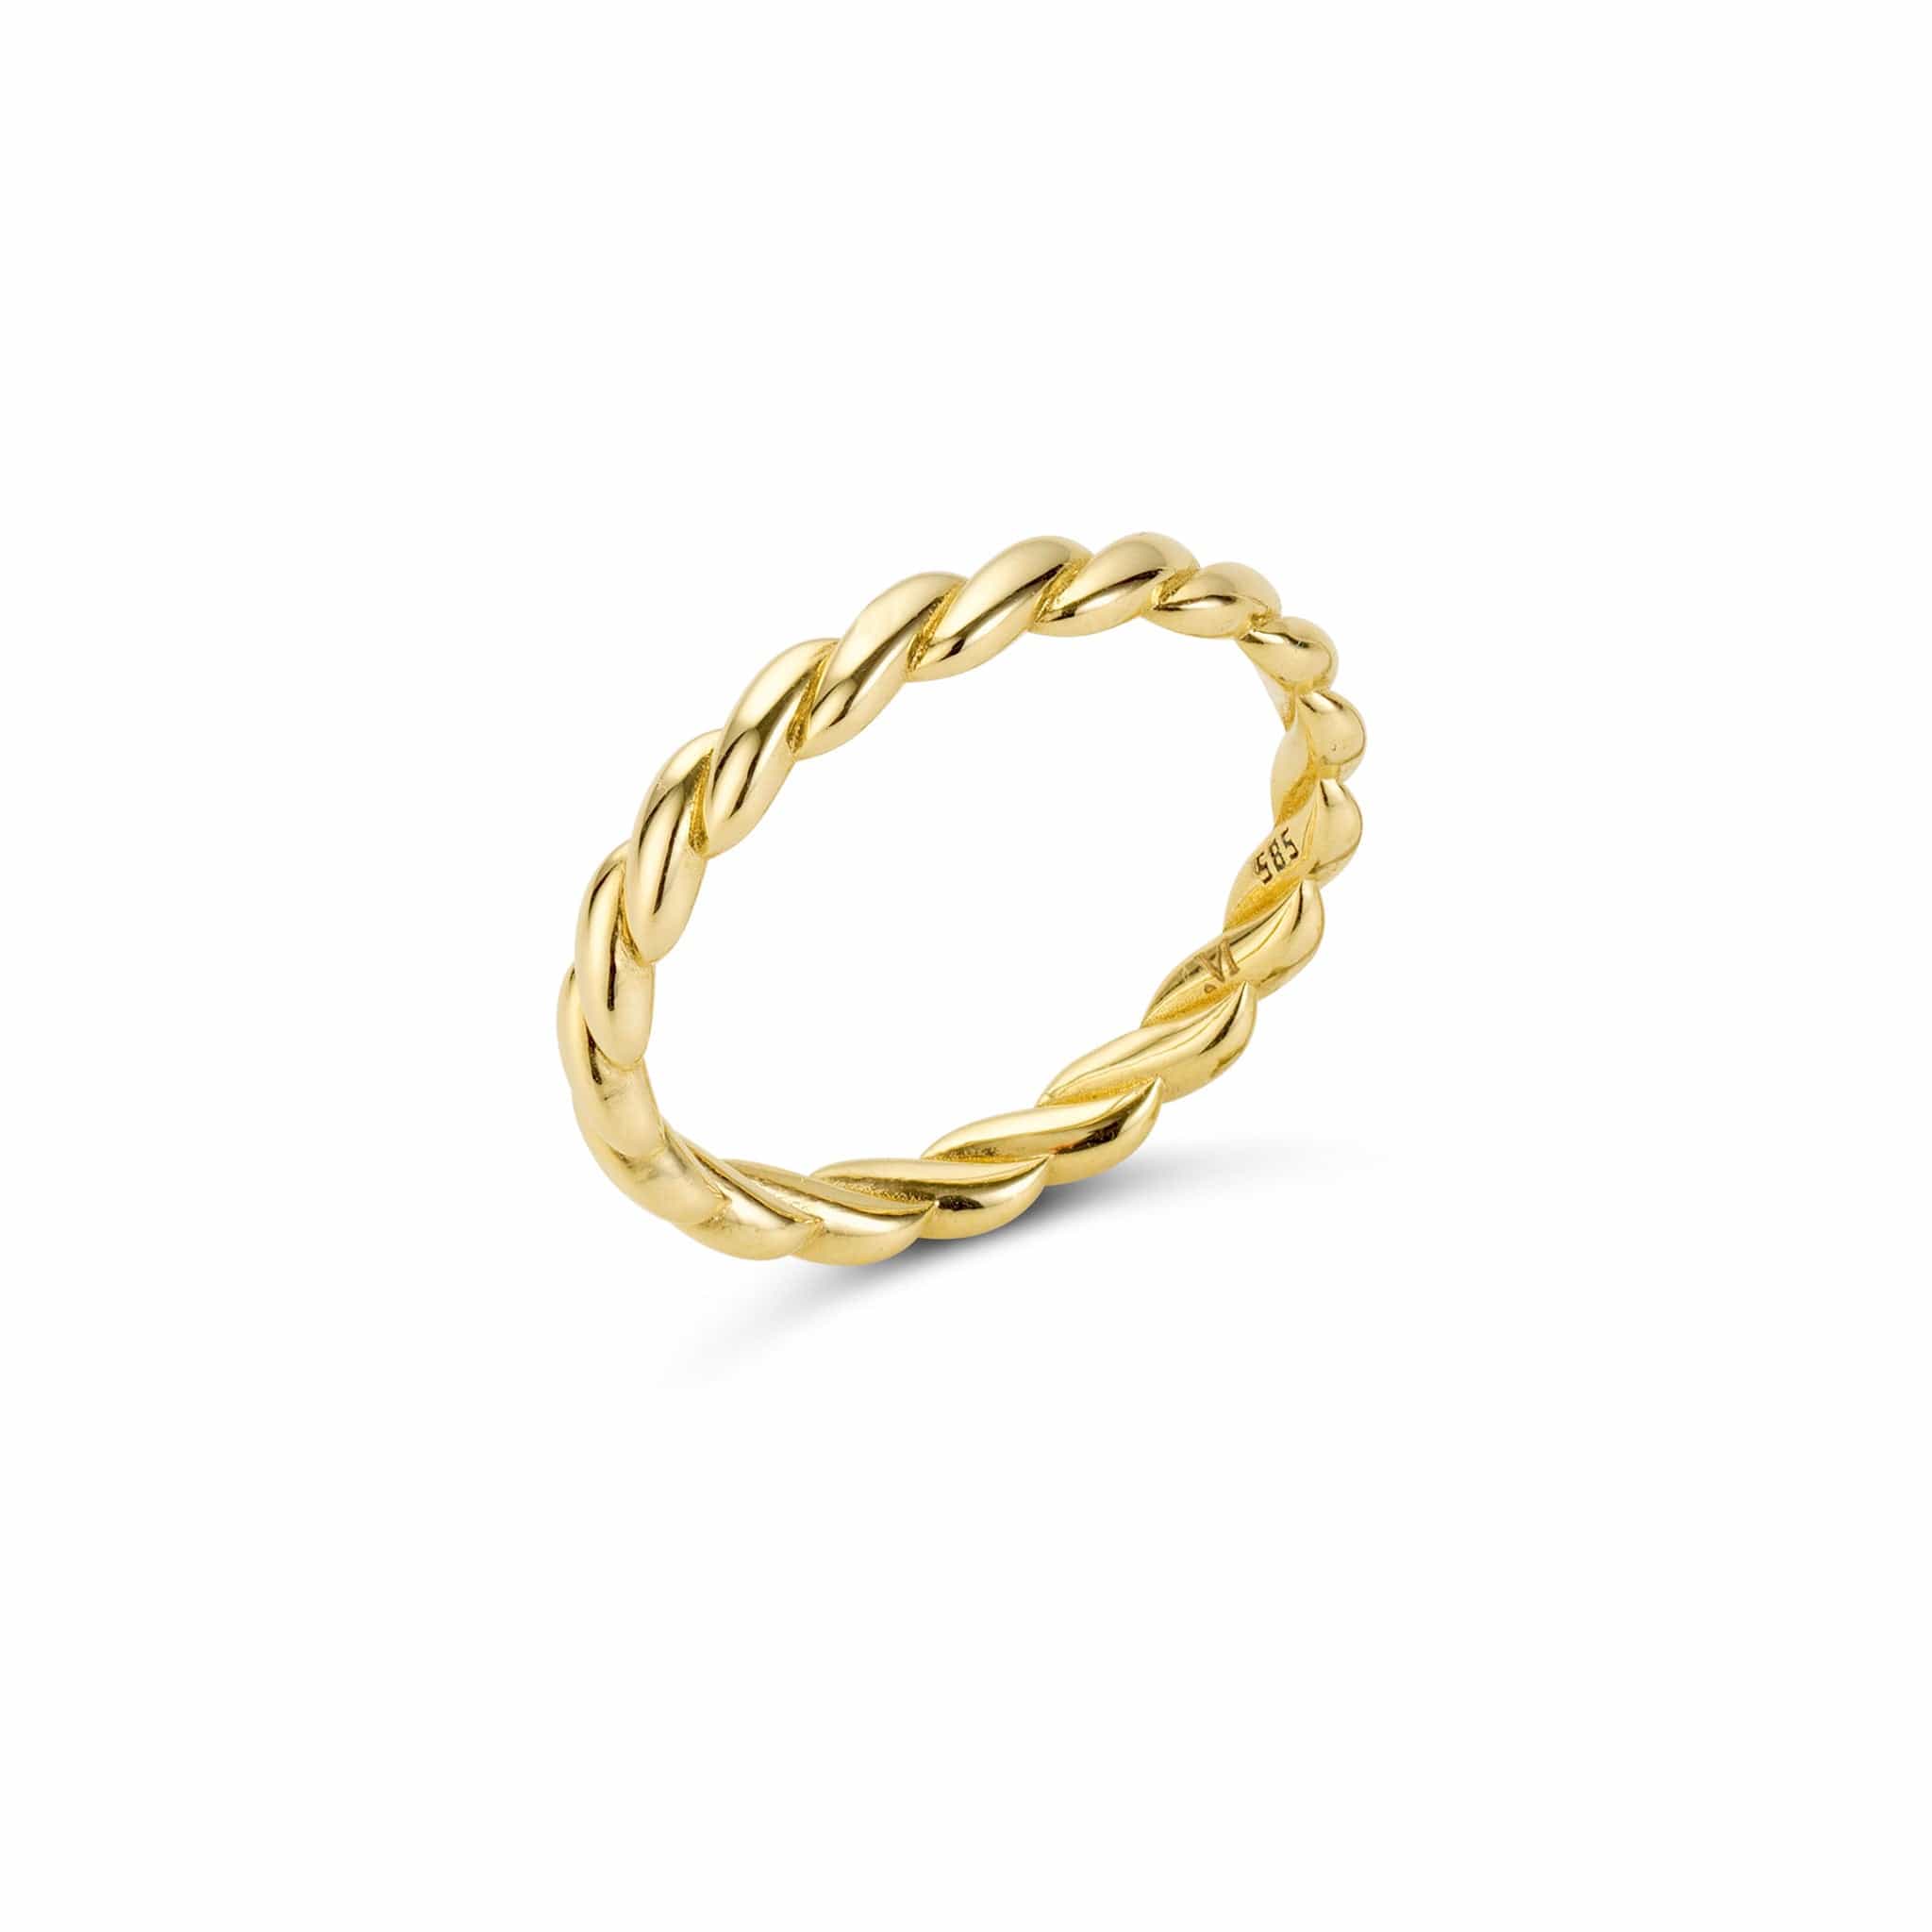 A 14k yellow gold infinity ring with a twist design on a white background.